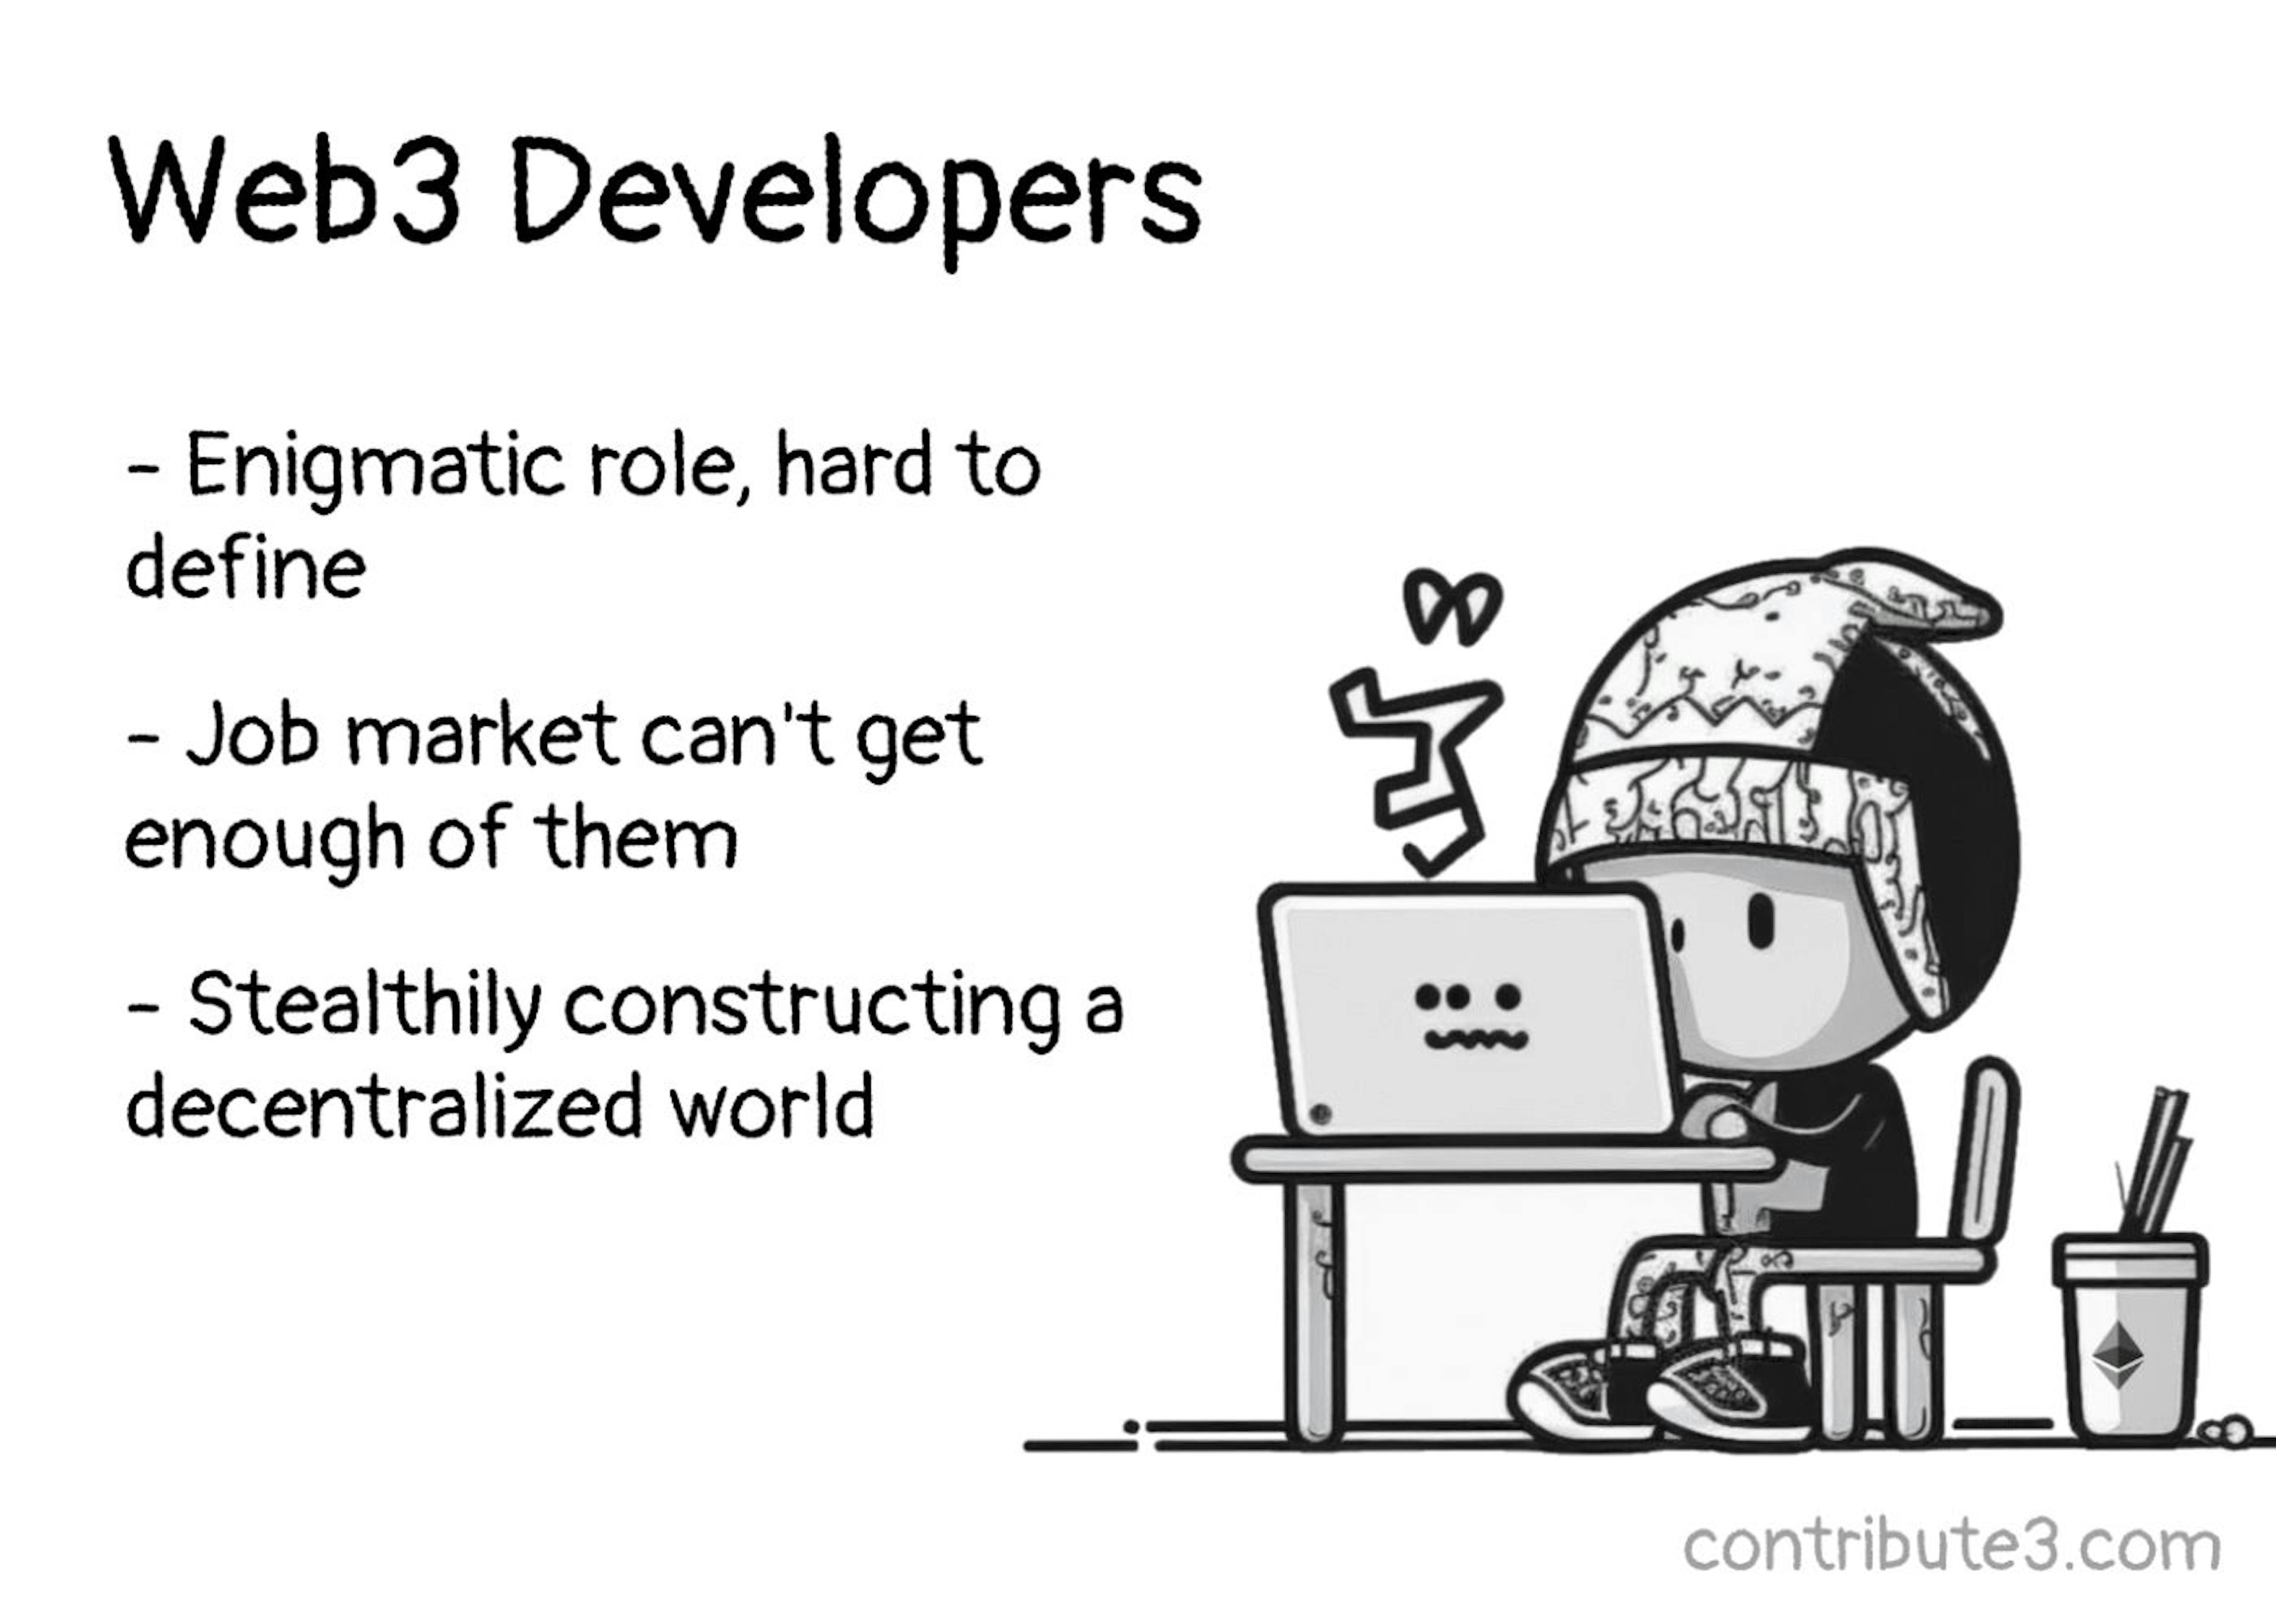 featured image - 3 Key Web3 Careers for Developers: Protocols, Smart Contracts, Apps